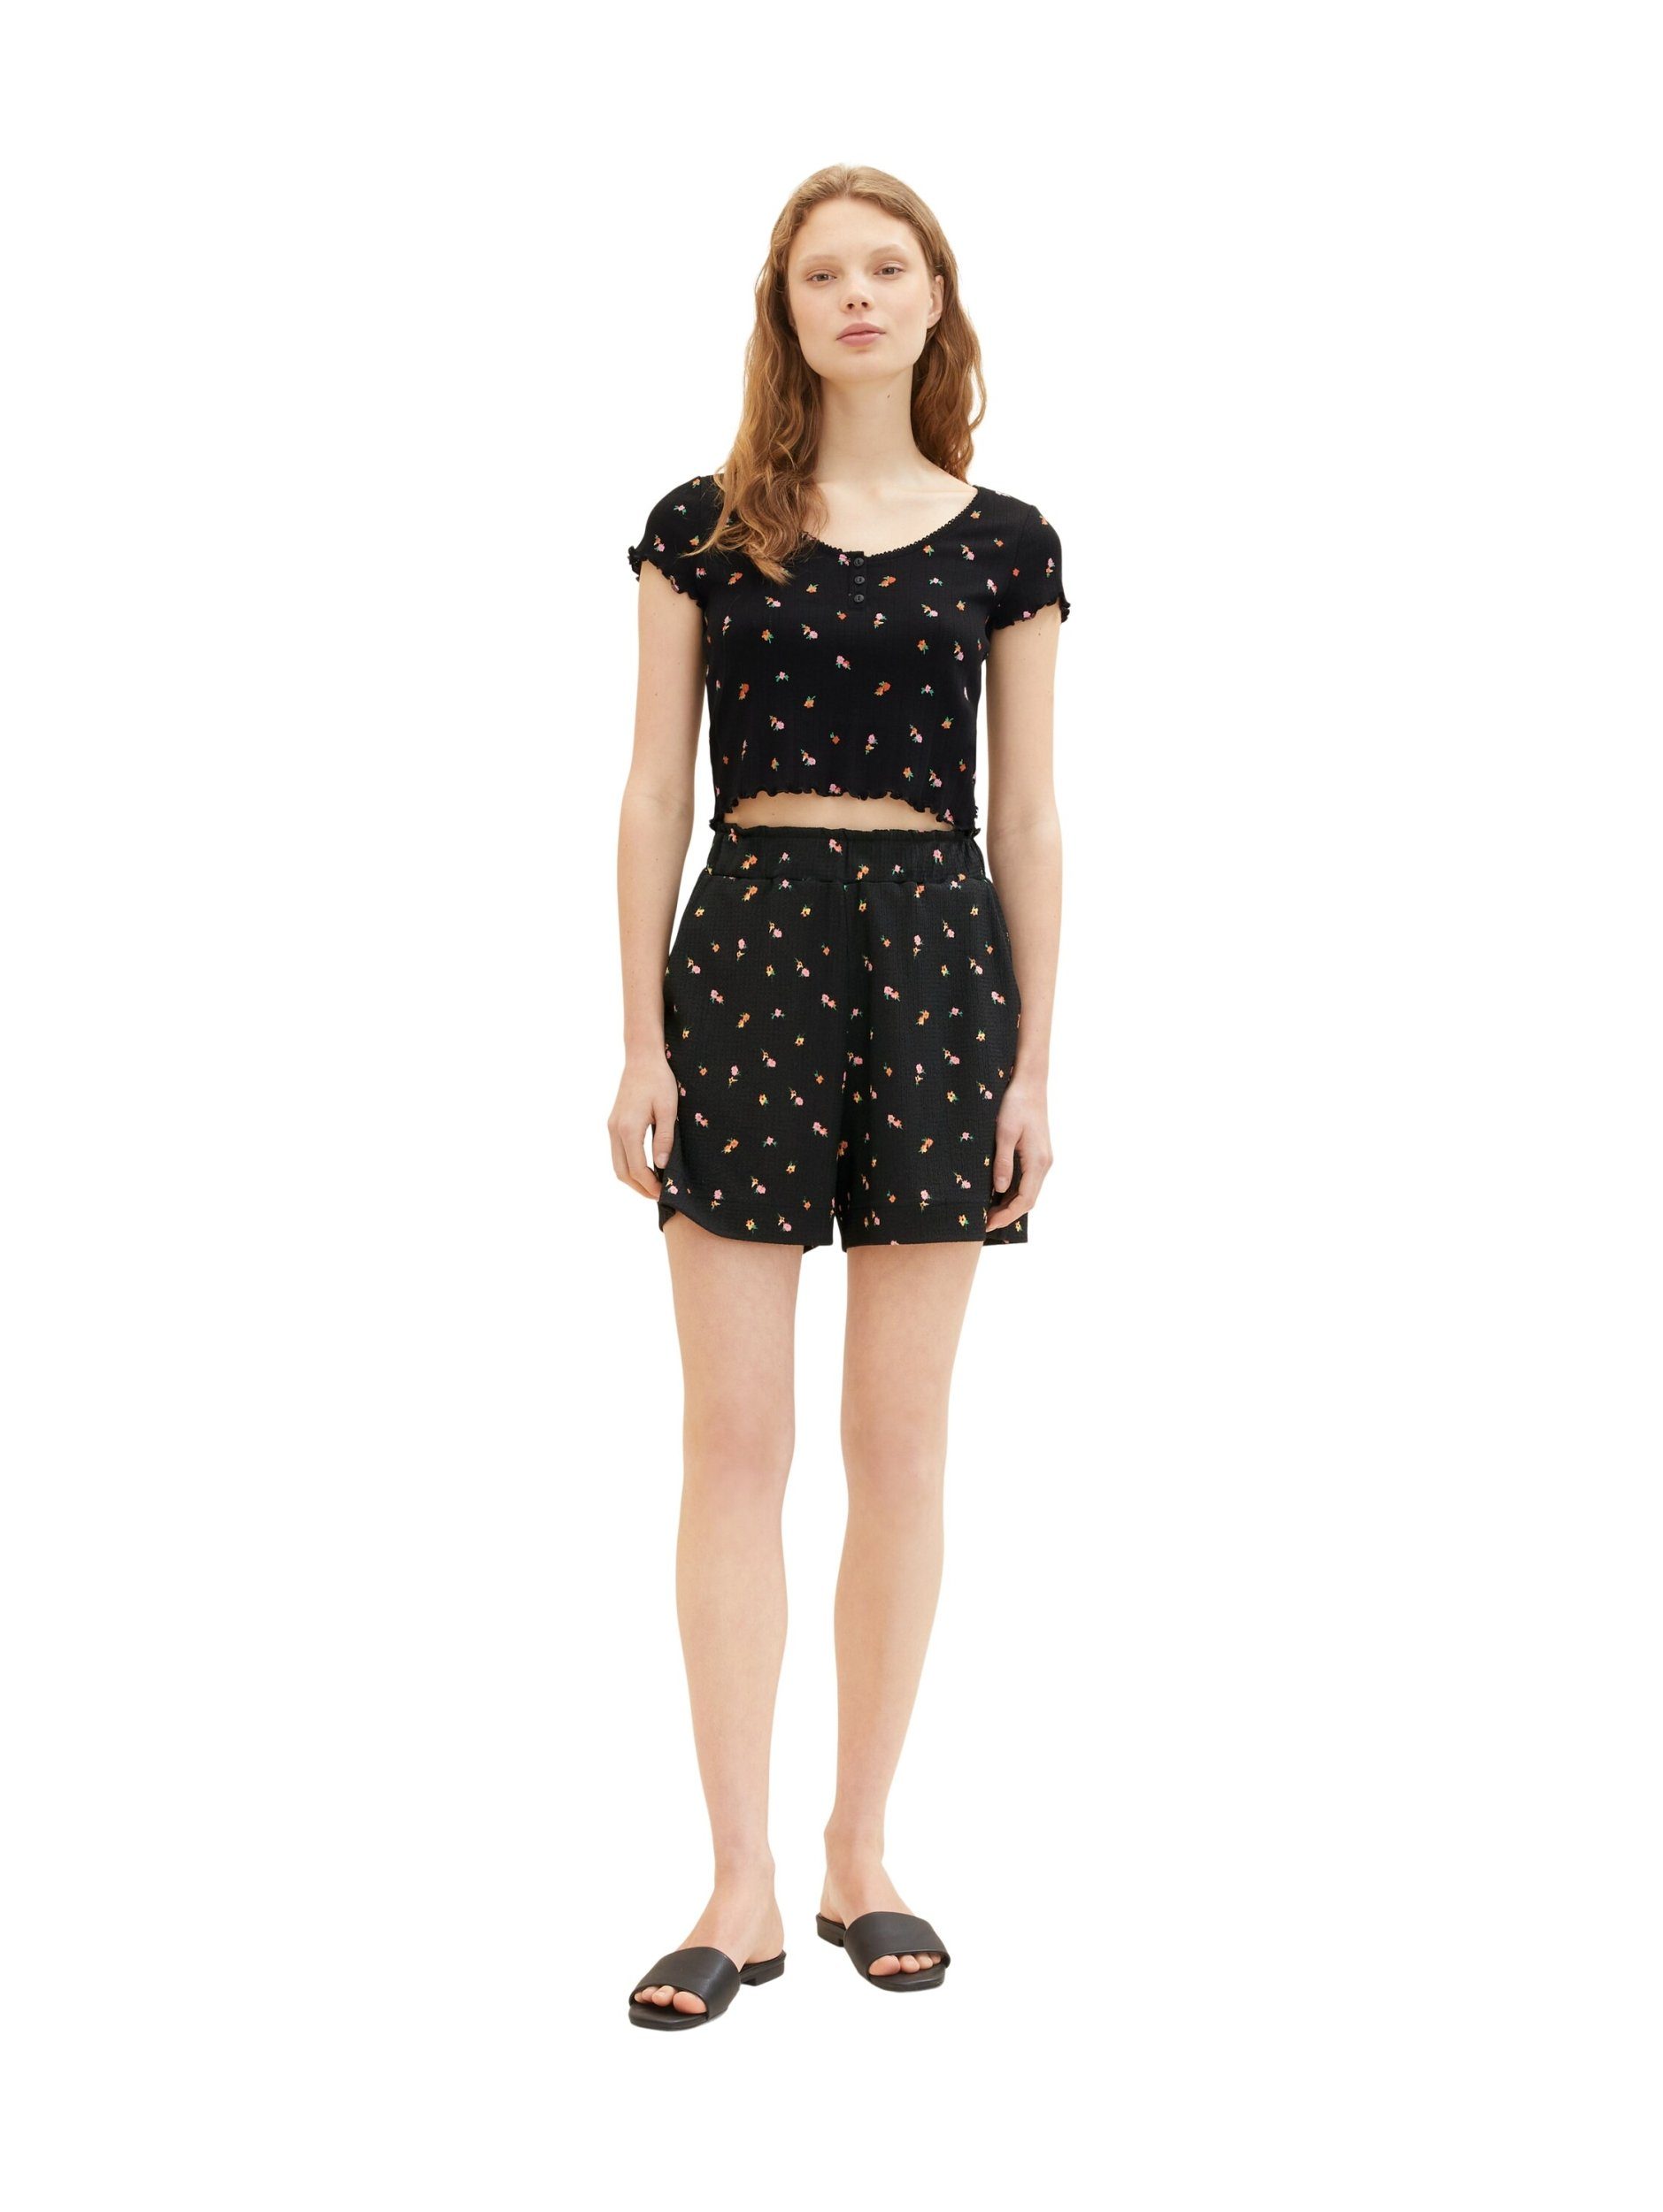 Shorts print black structured TOM Easy flower shorts small 31950 TAILOR